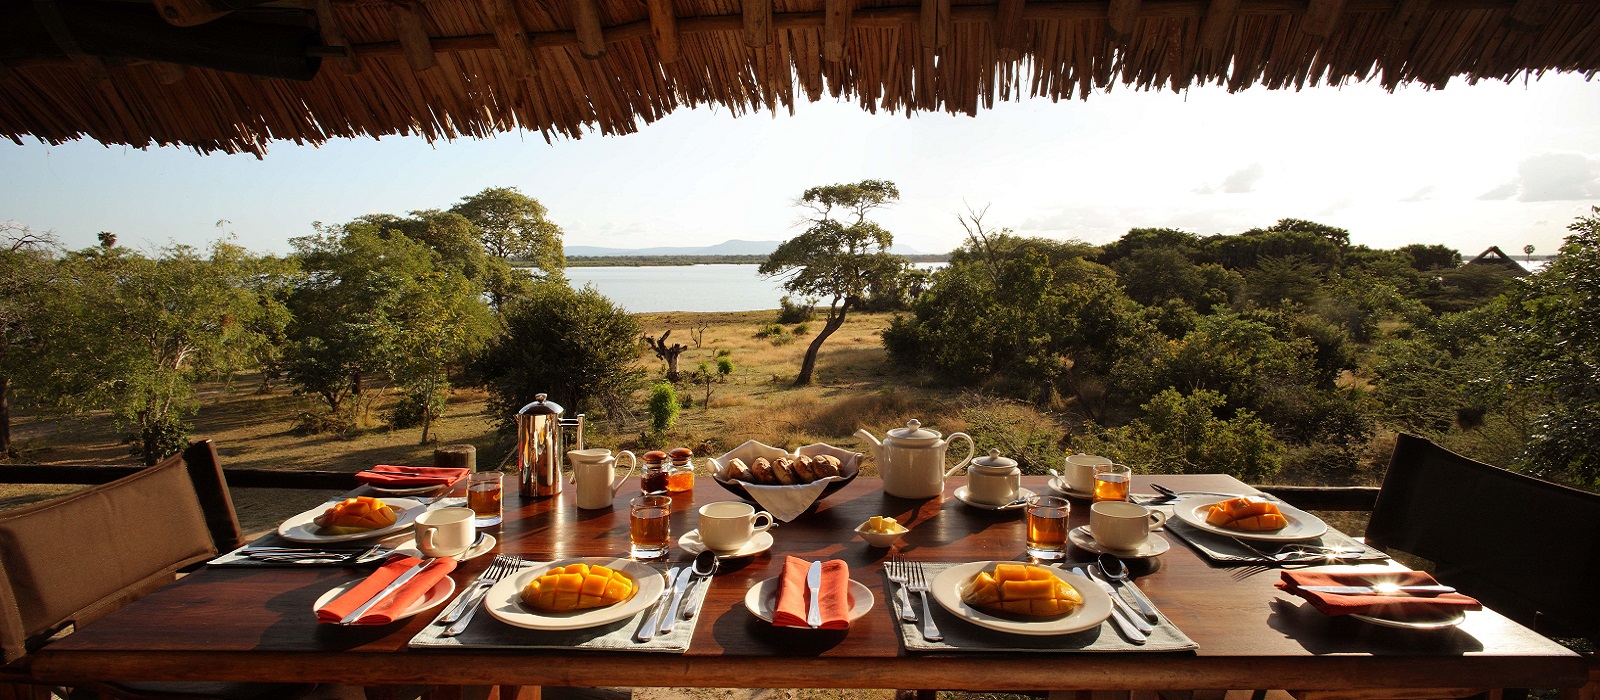 Enchanting-Travels-Africa-safaris-Breakfast-with-a-view-at-Siwandus-elevated-restaurant_0.jpg